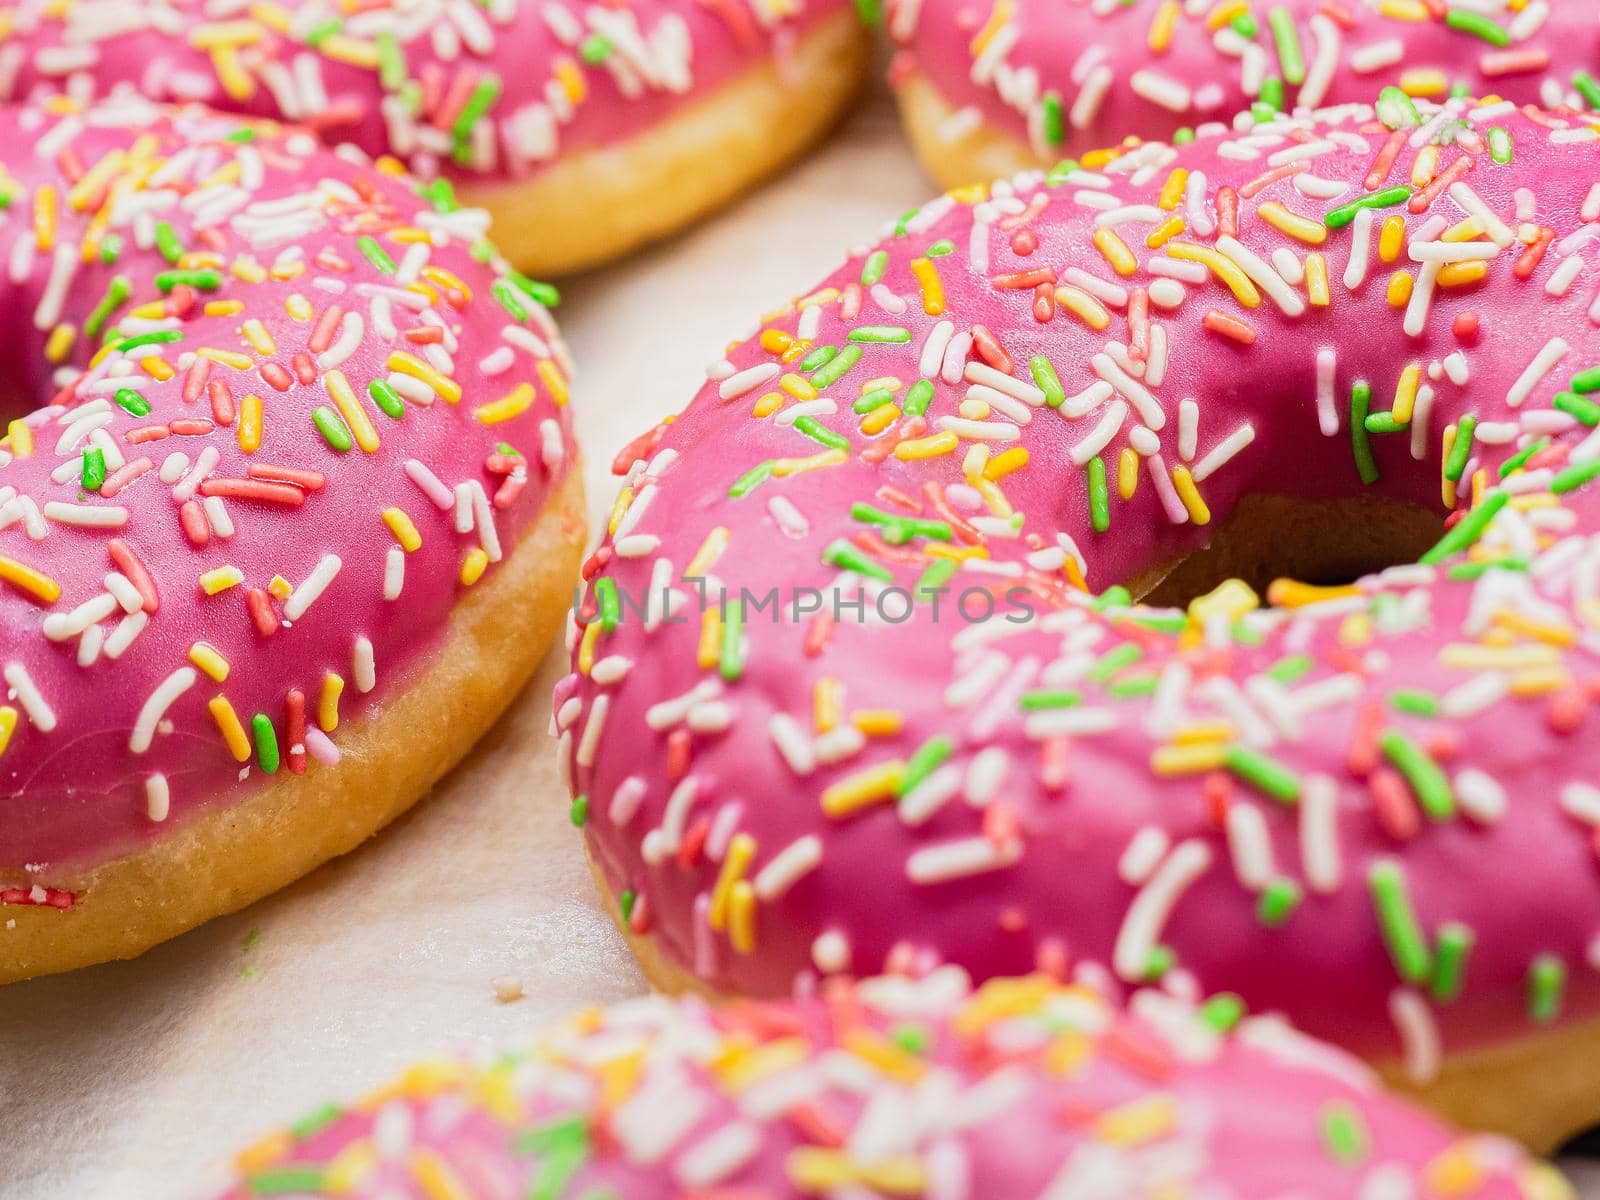 donuts poured with pink icing sprinkled with pastry topping with chopsticks.